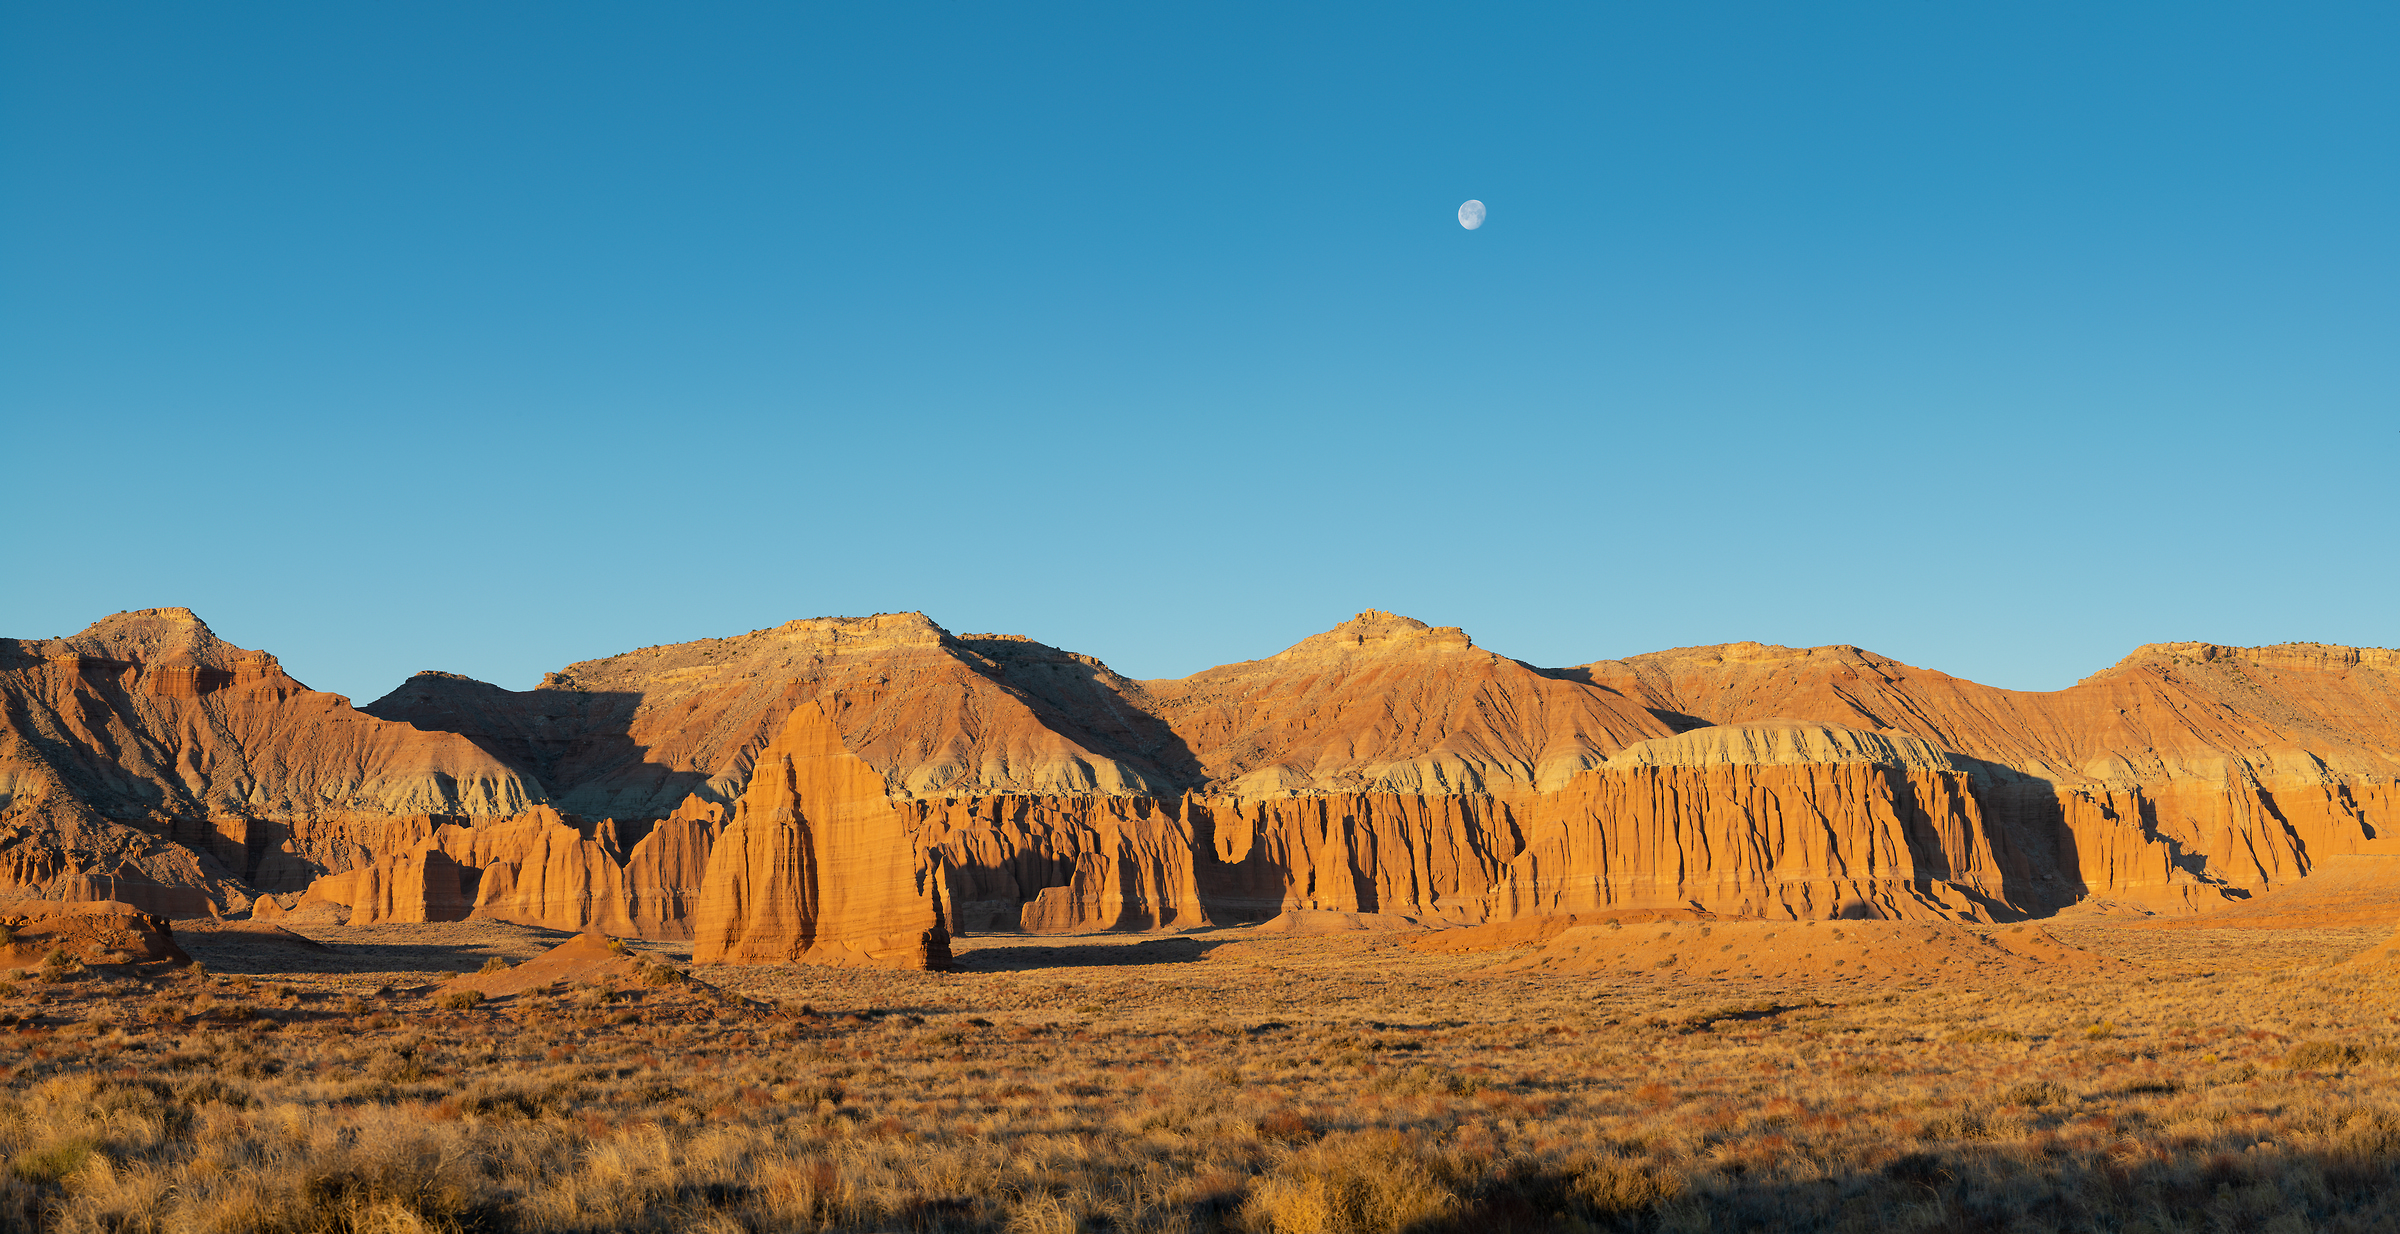 291 megapixels! A very high resolution, large-format VAST photo print of a Utah landscape with moon; big wallpaper photograph created by Greg Probst in Capitol Reef National Park, Utah